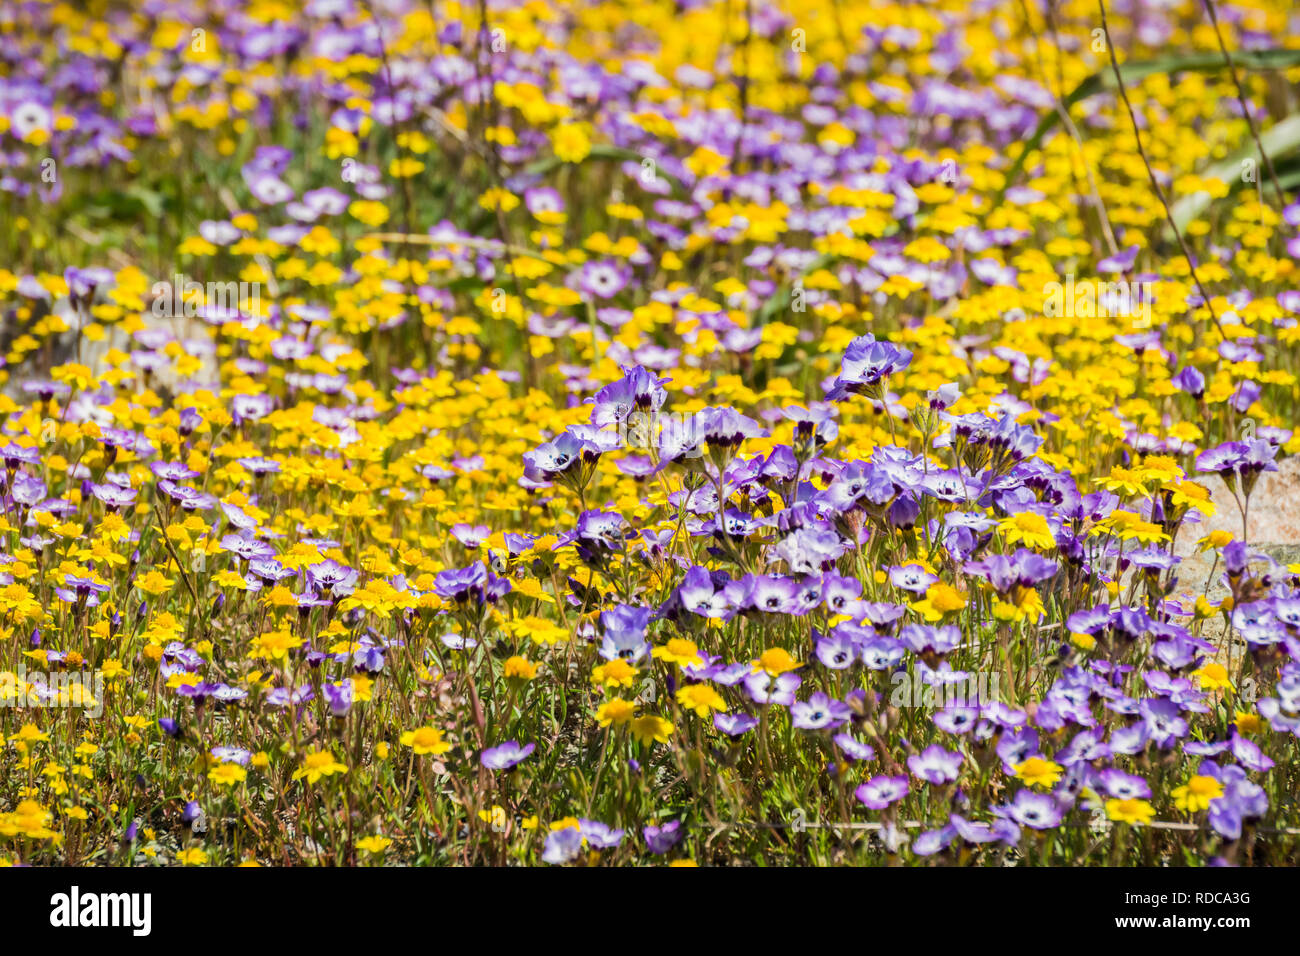 Goldfields and Gilia wildflowers blooming on a meadow, Henry W. Coe State Park, California Stock Photo